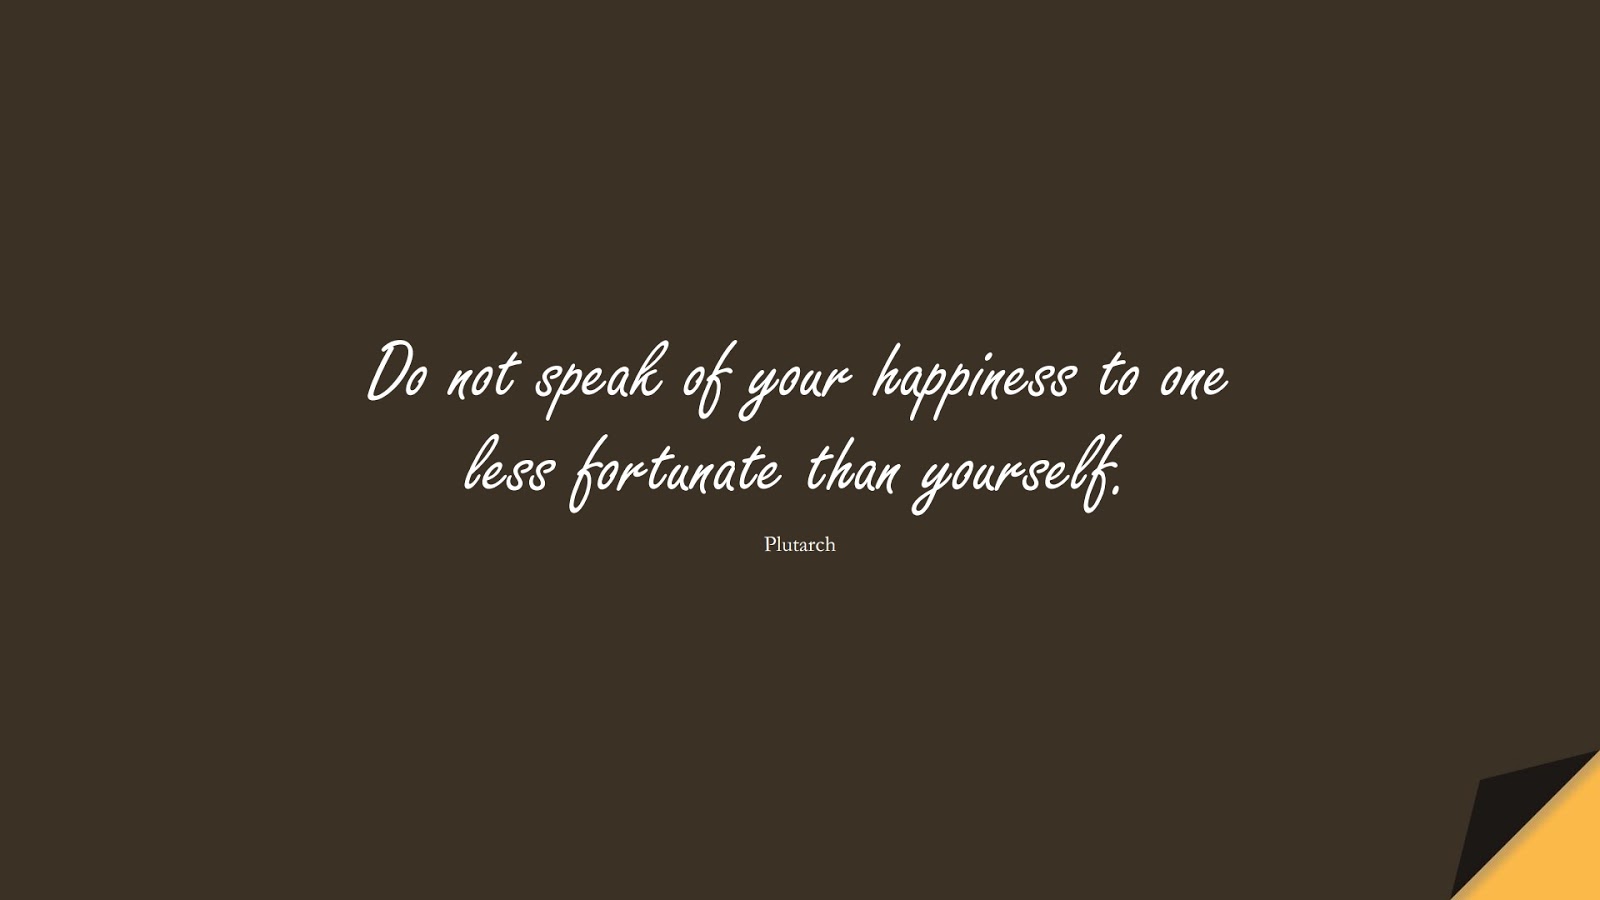 Do not speak of your happiness to one less fortunate than yourself. (Plutarch);  #InspirationalQuotes